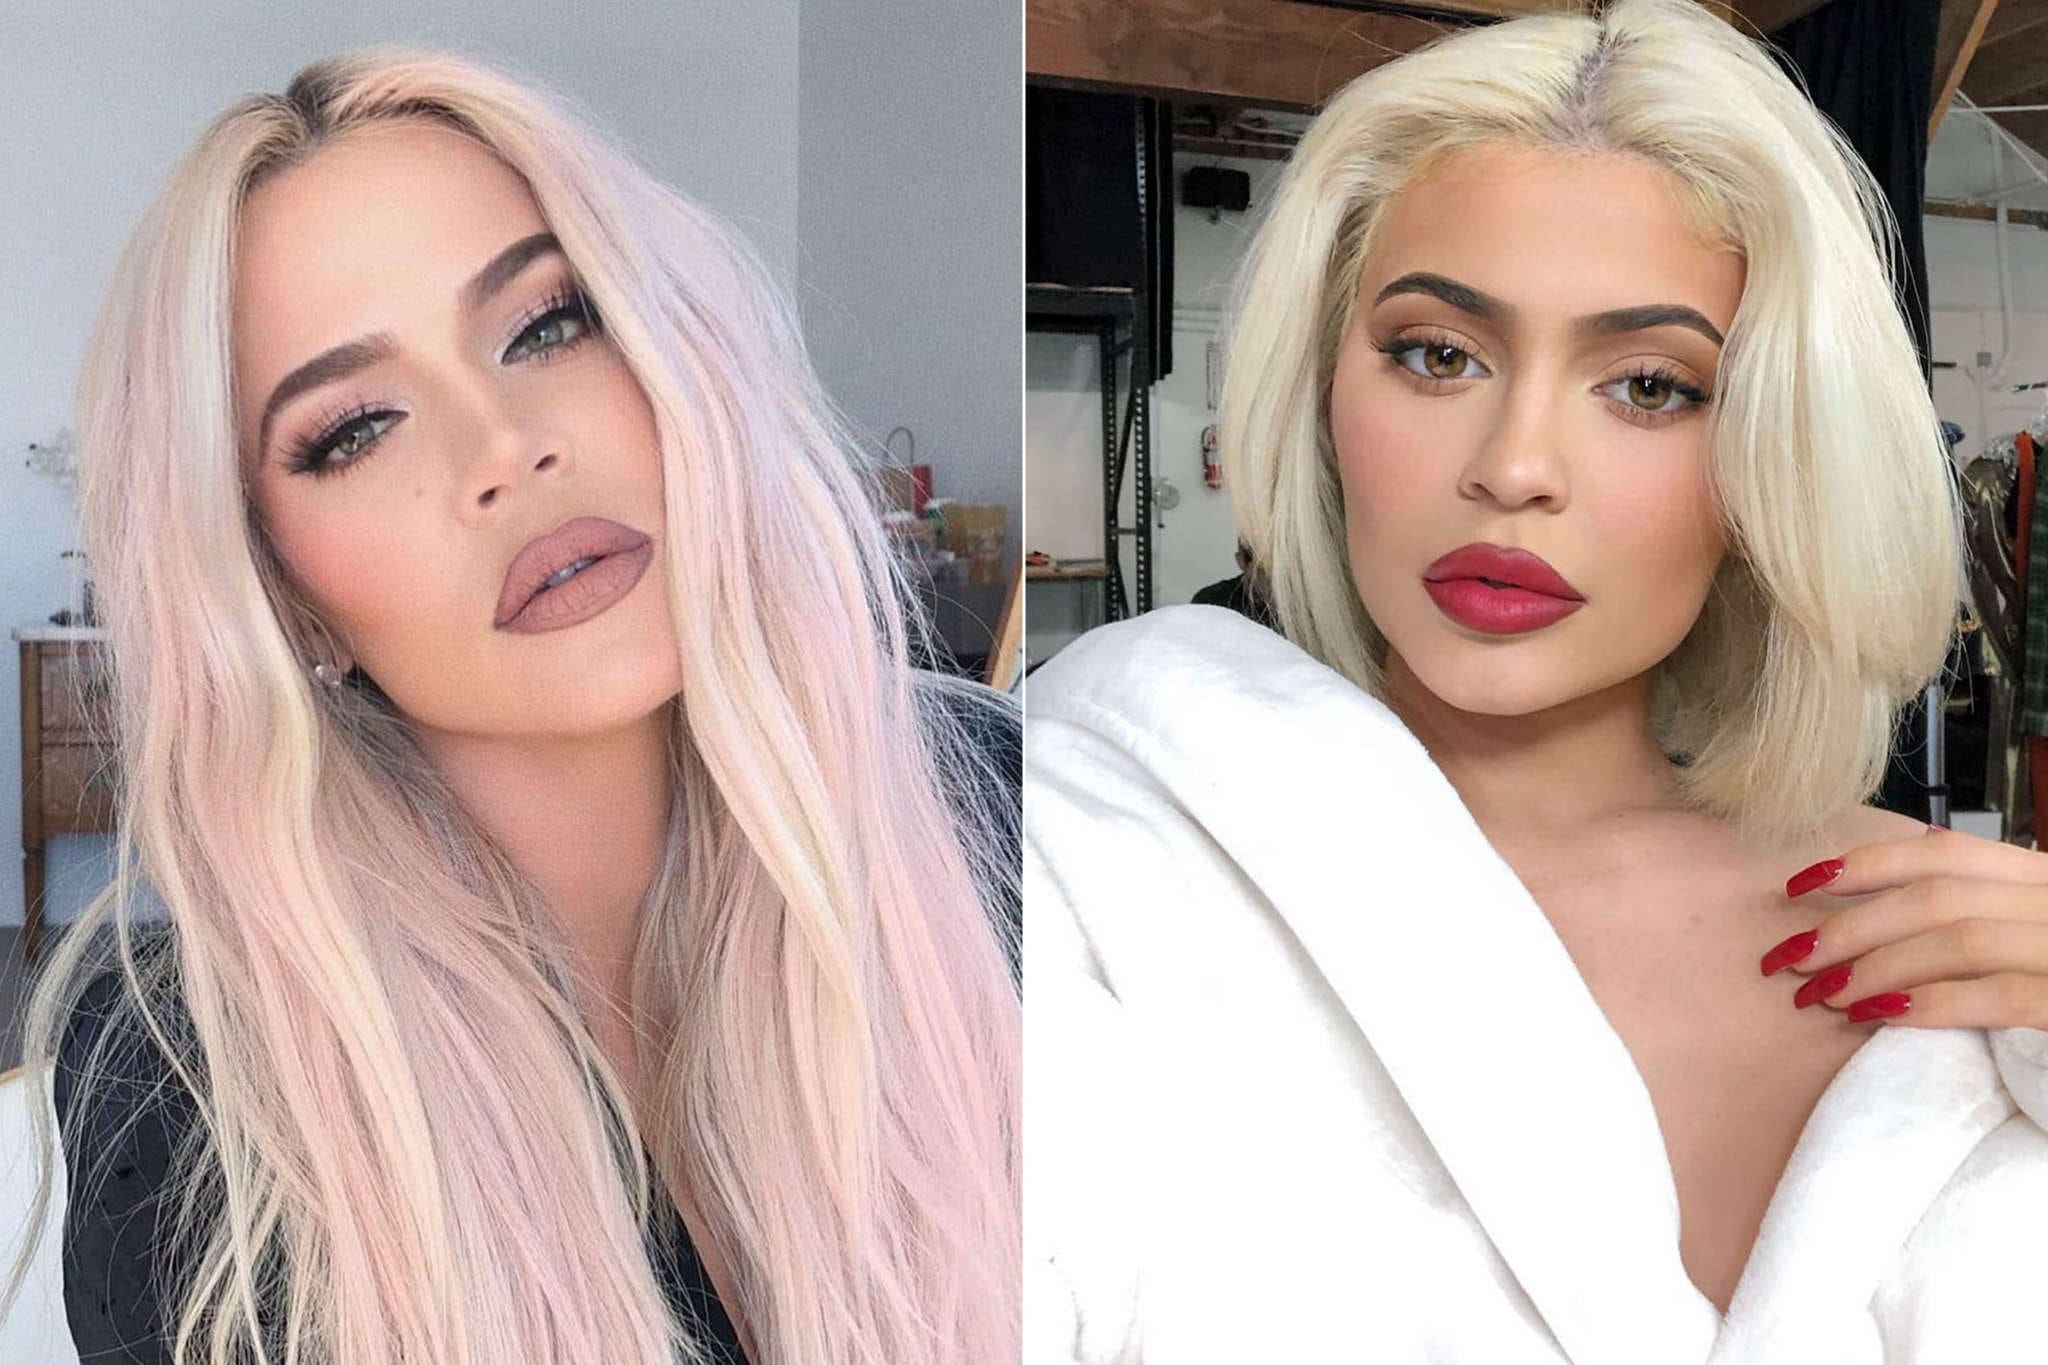 Kylie Jenner And Khloe Kardashian Are Accused On Photoshopping Their Photo For A Makeup Collaboration